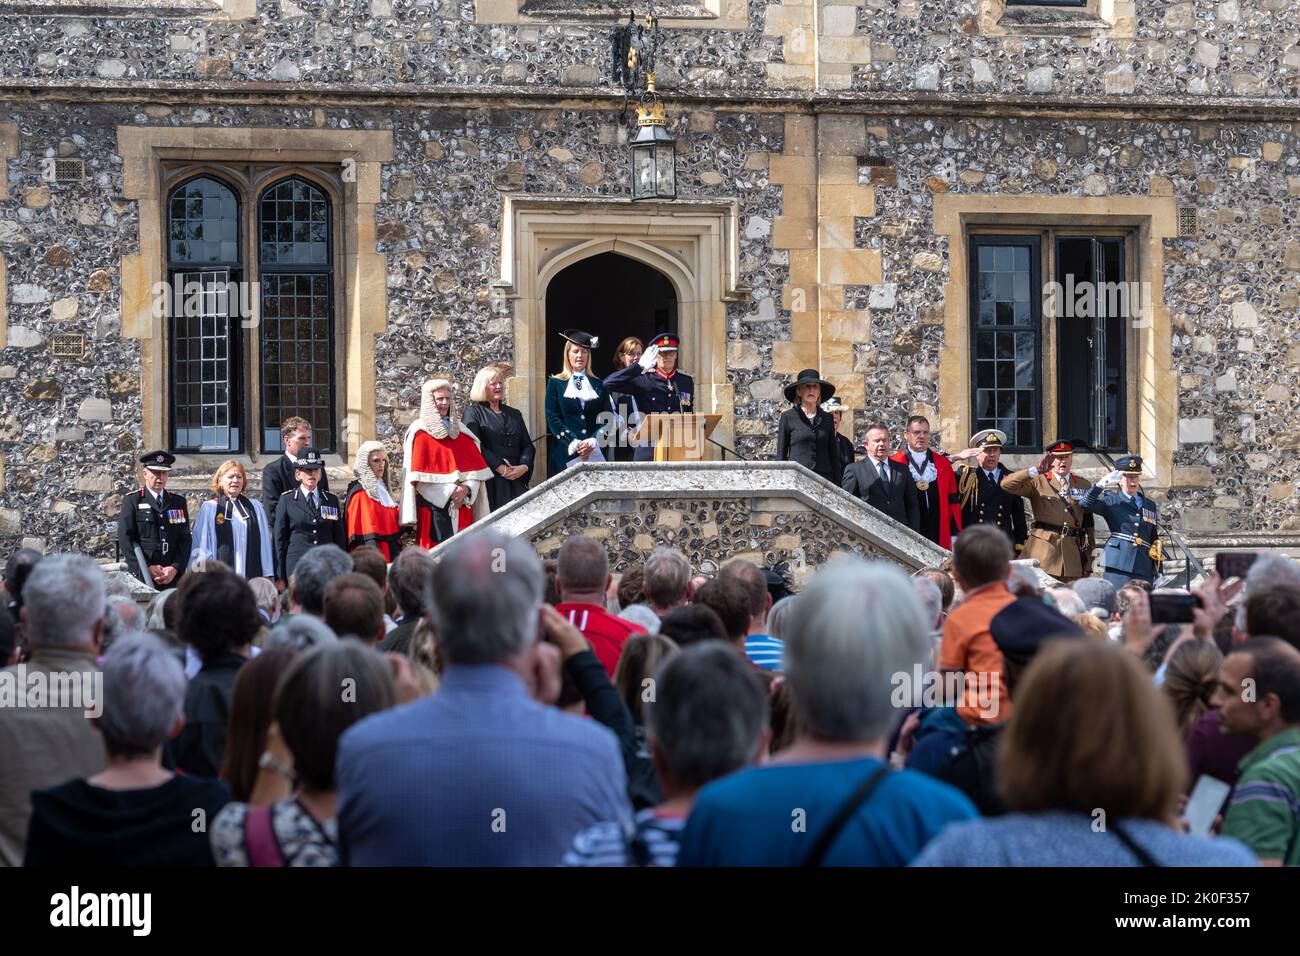 Winchester, Hampshire, UK. 11th September, 2022. The Proclamation of the Accession of King Charles III three days after the death of Queen Elizabeth II. The High Sheriff of Hampshire, Lady Edwina Grosvenor, accompanied by the Lord Lieutenant of Hampshire and other dignitaries, read the proclamation at 1pm outside The Great Hall in front of crowds of people. Stock Photo